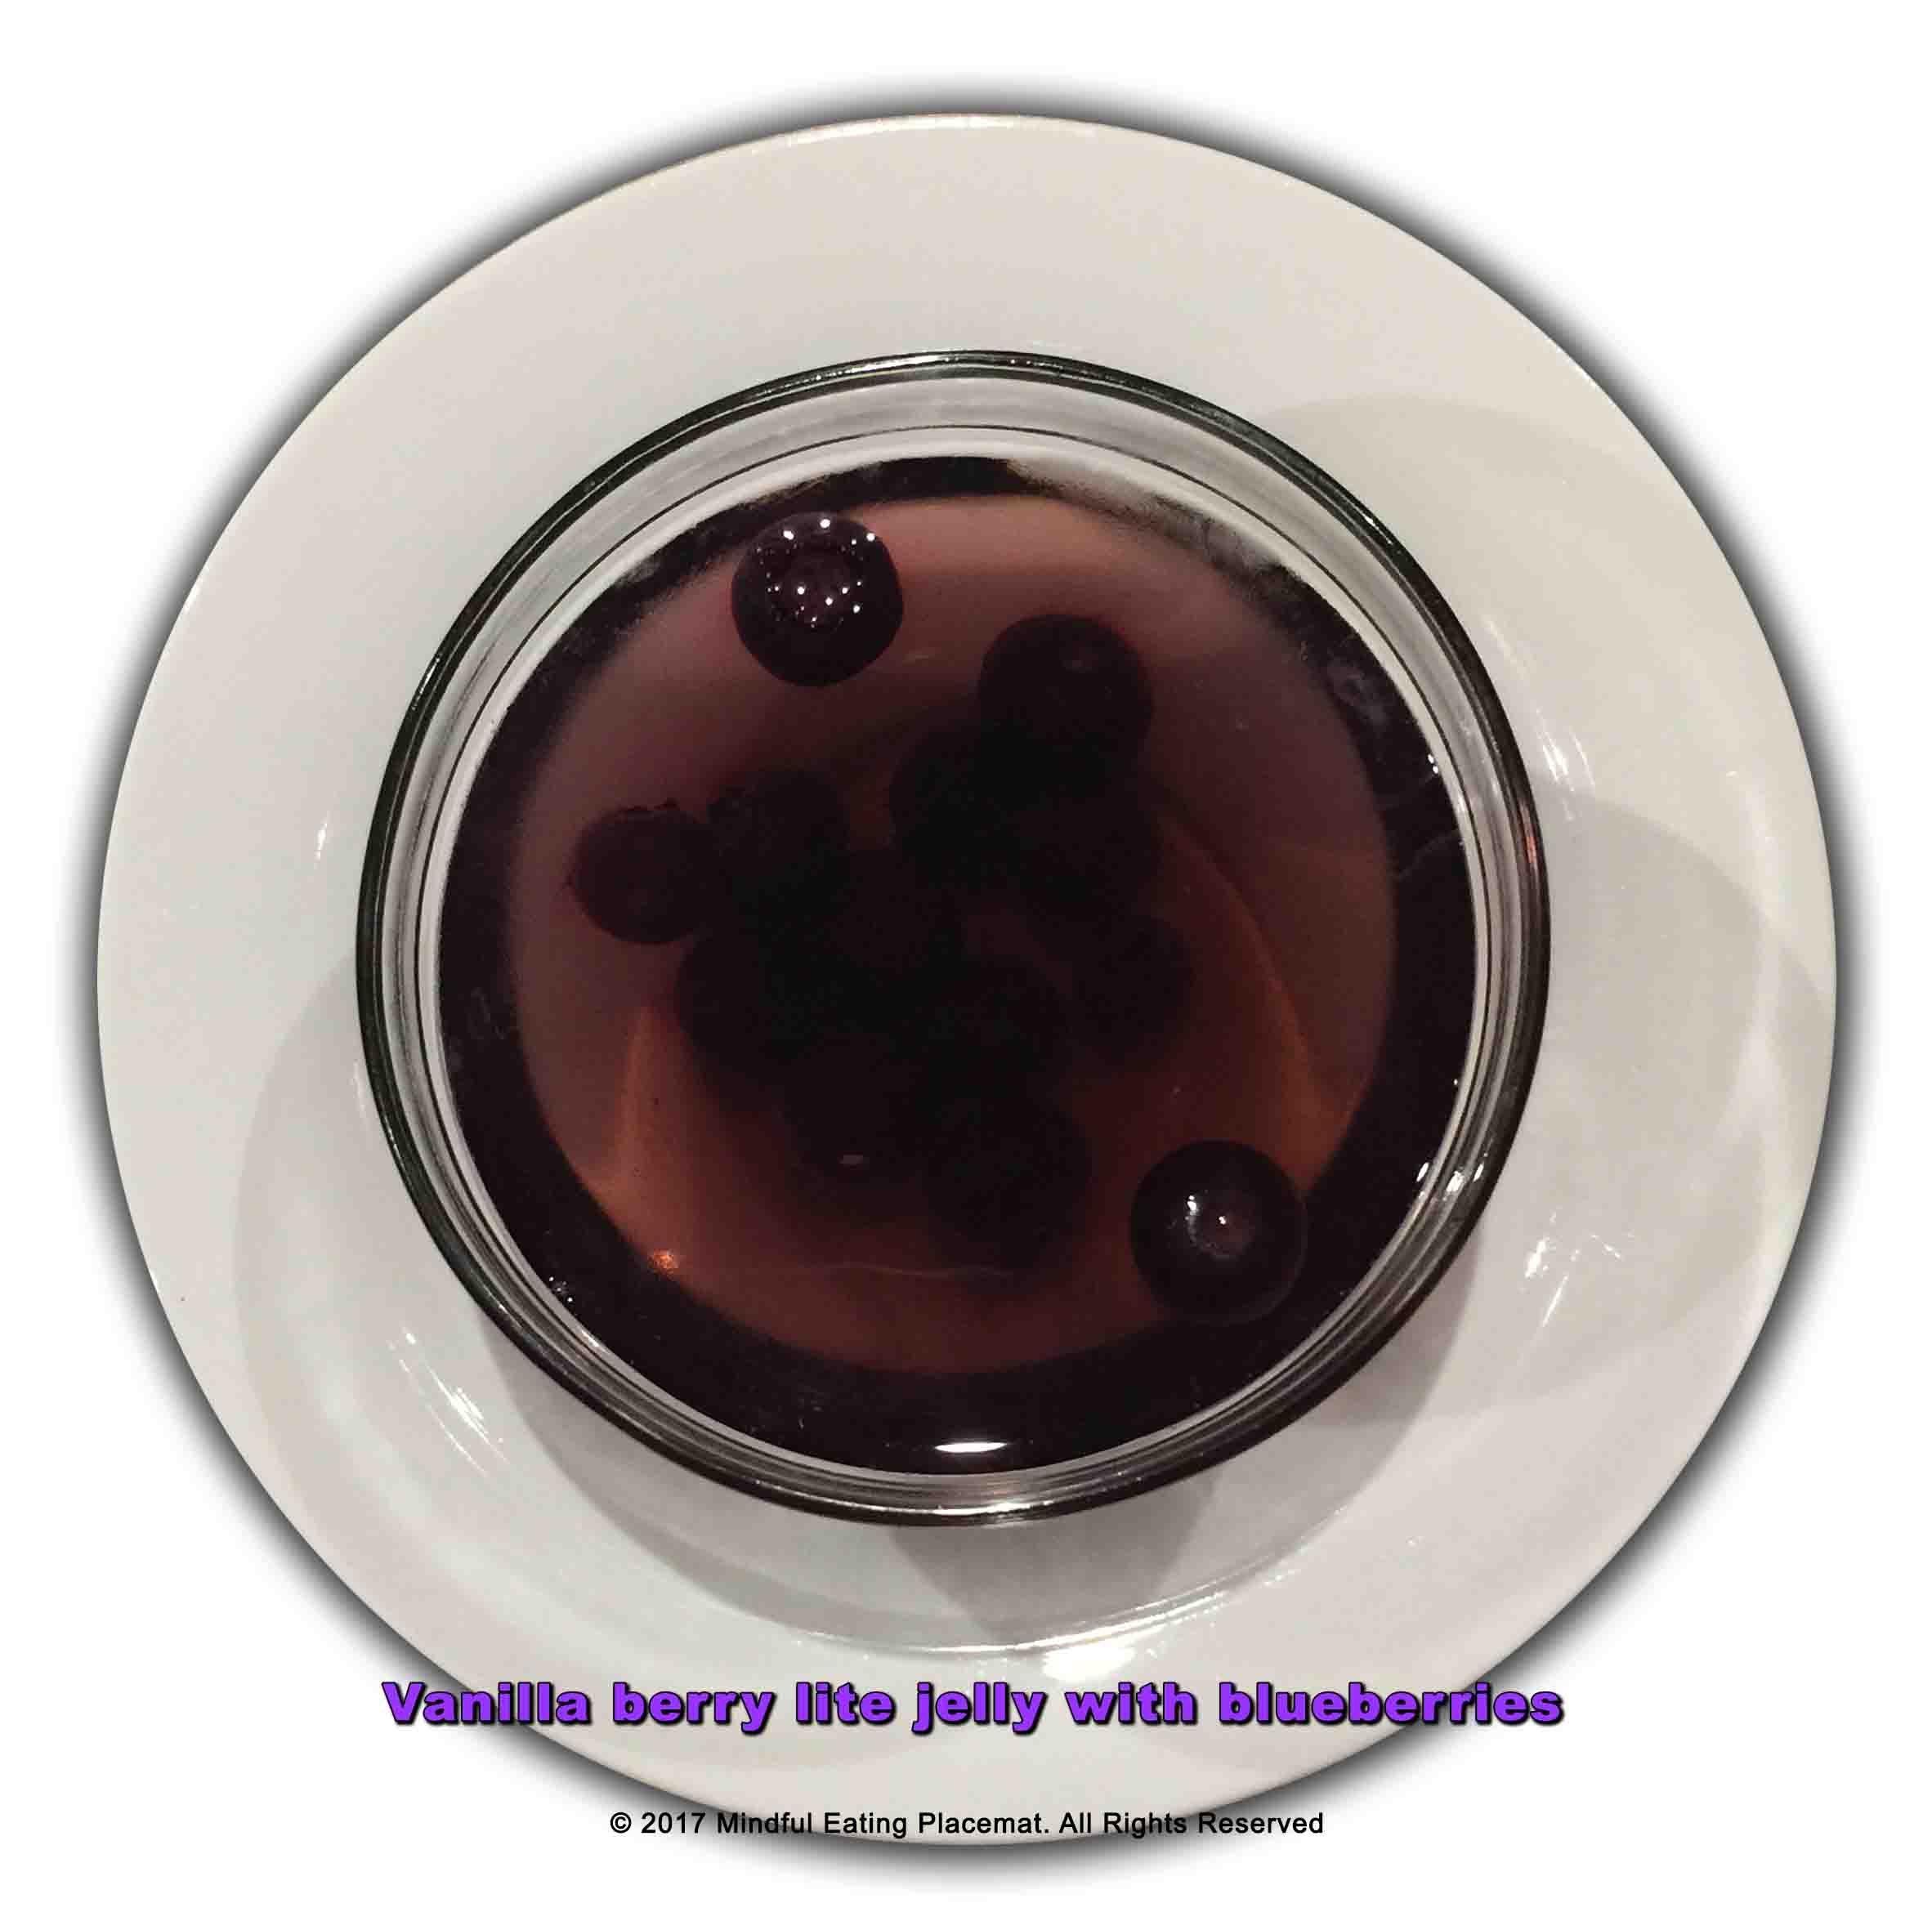 Vanilla berry jelly with blueberries